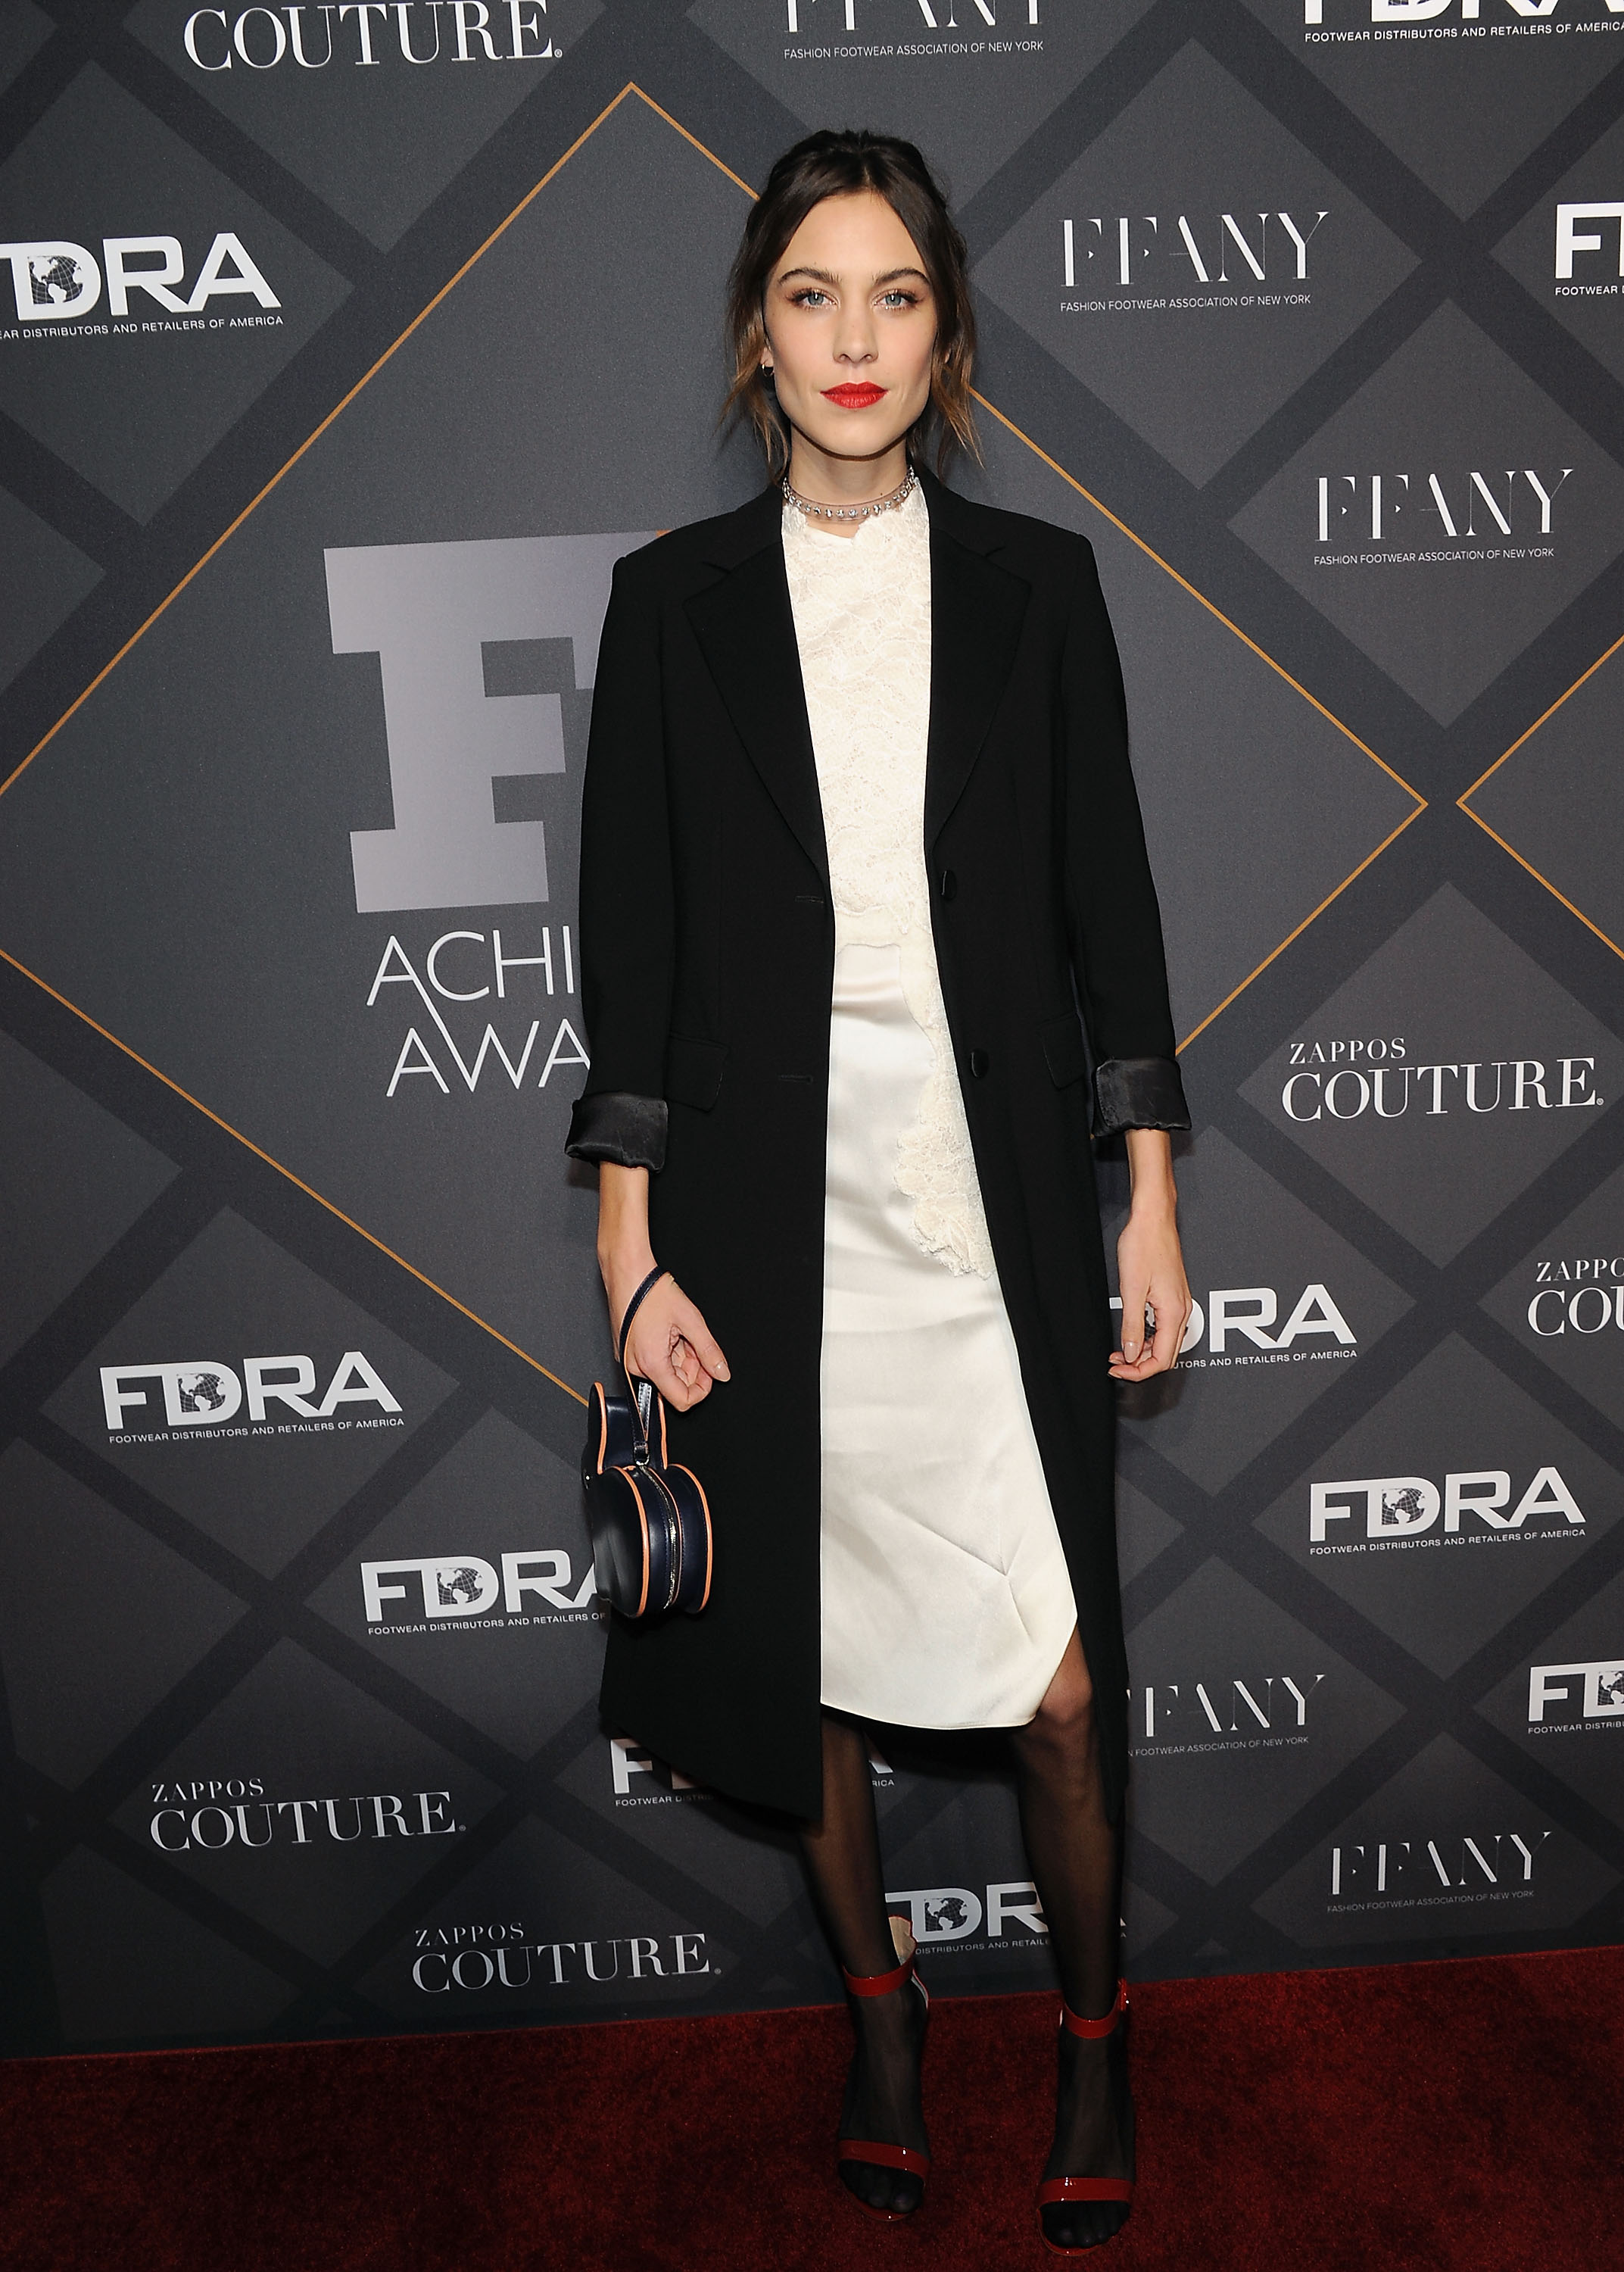 NEW YORK, NY - DECEMBER 02: Model Alexa Chung attends the 29th FN Achievement Awards at IAC Headquarters on December 2, 2015 in New York City. (Photo by Desiree Navarro/WireImage)